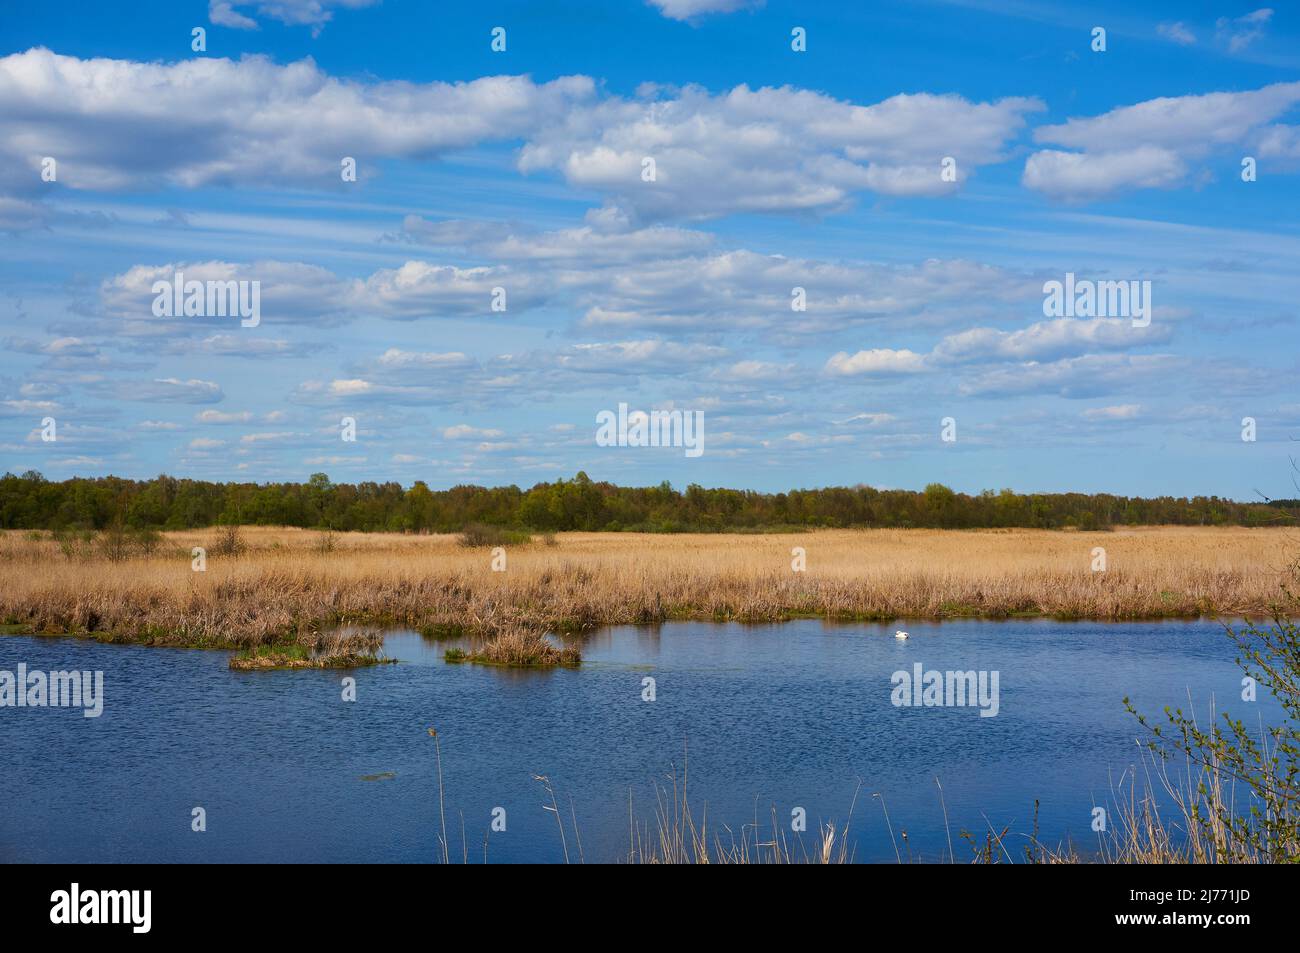 The nature of the central part of Russia. A small river flows in the forest. There are cirrus clouds in the sky. Quiet natural beauty Stock Photo